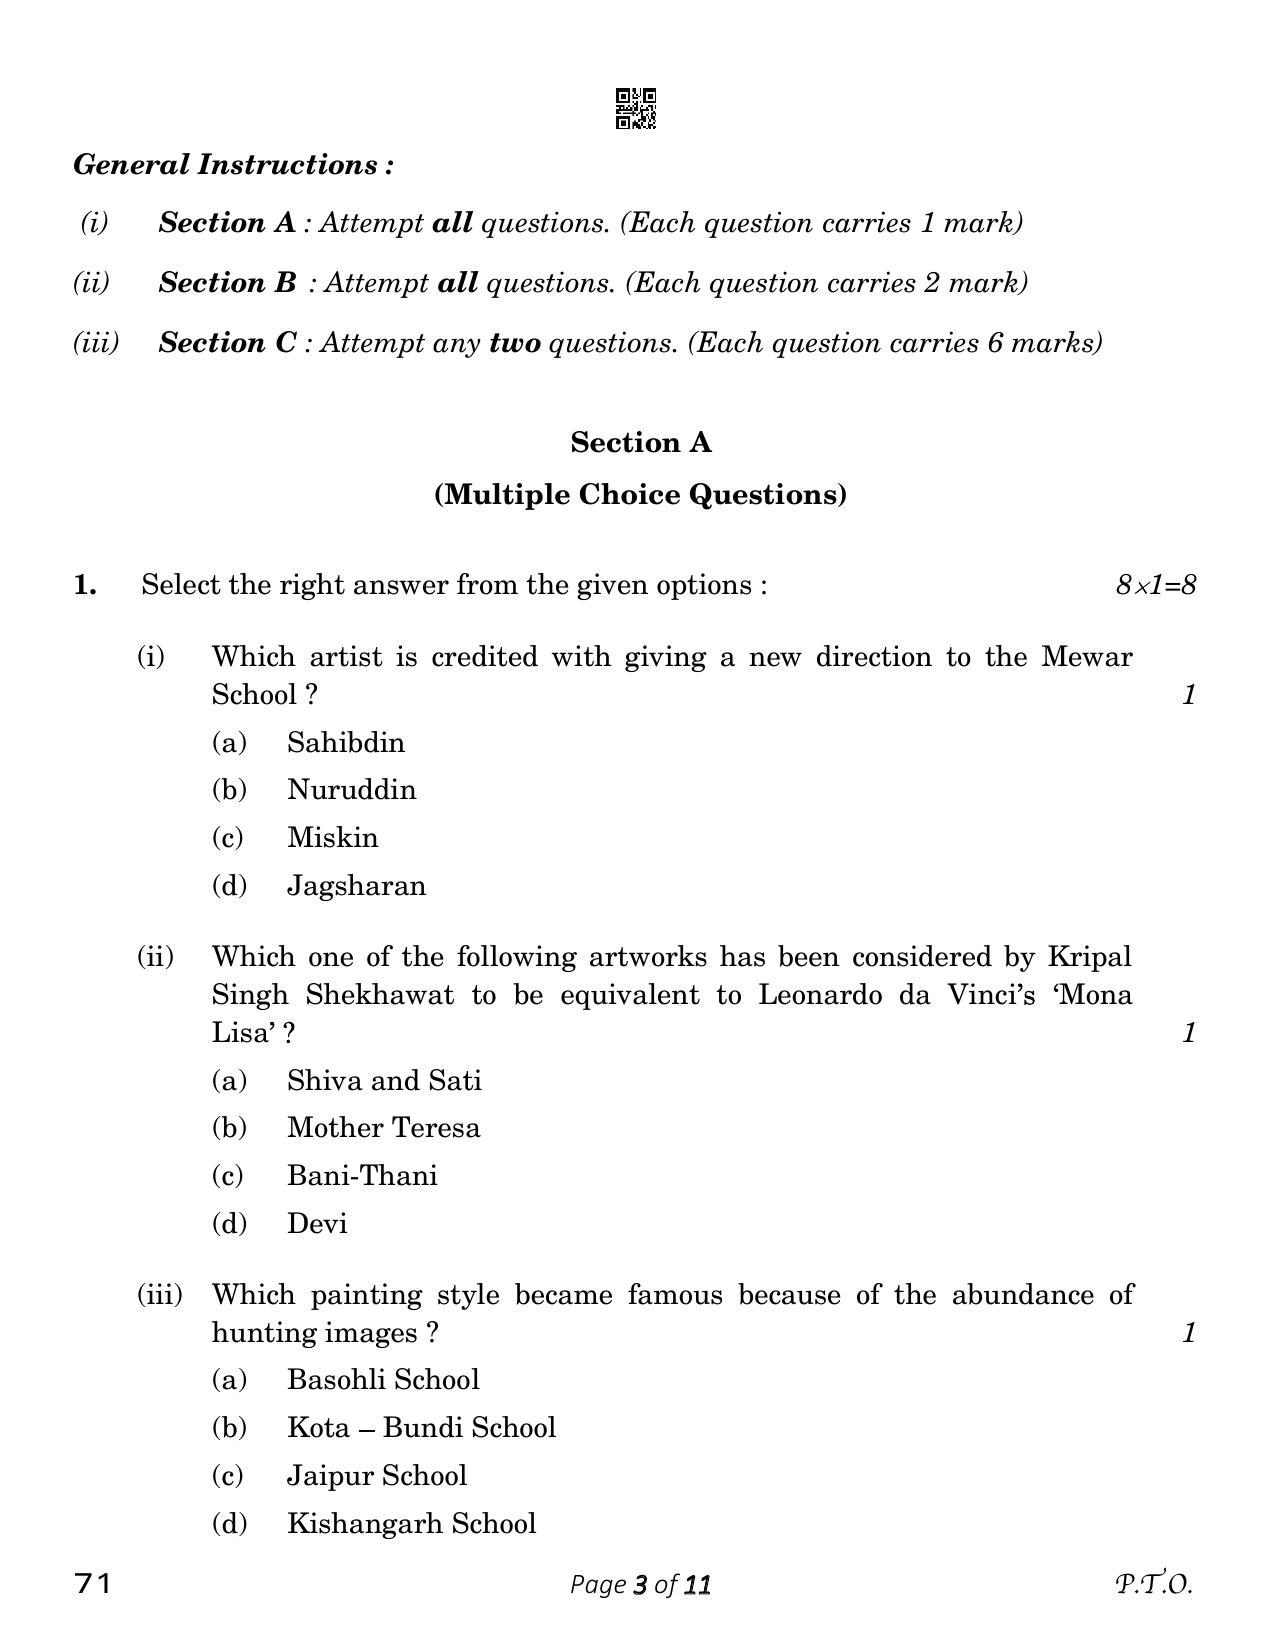 CBSE Class 12 Painting (Compartment) 2023 Question Paper - Page 3